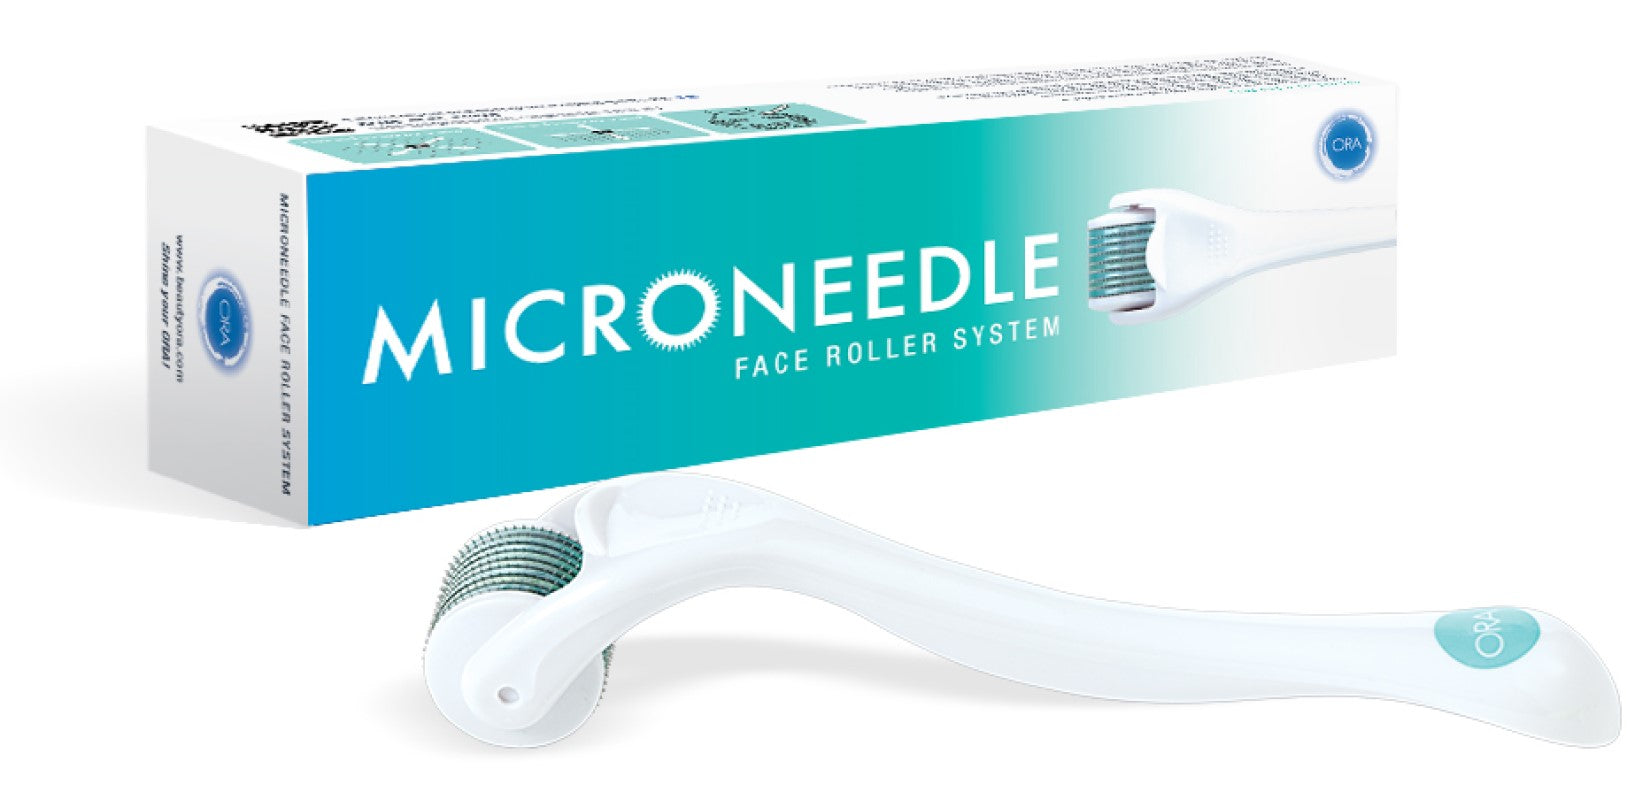 ORA Facial Microneedle Roller System - Advanced Therapy (1.0 mm) - Aqua Head, White Handle